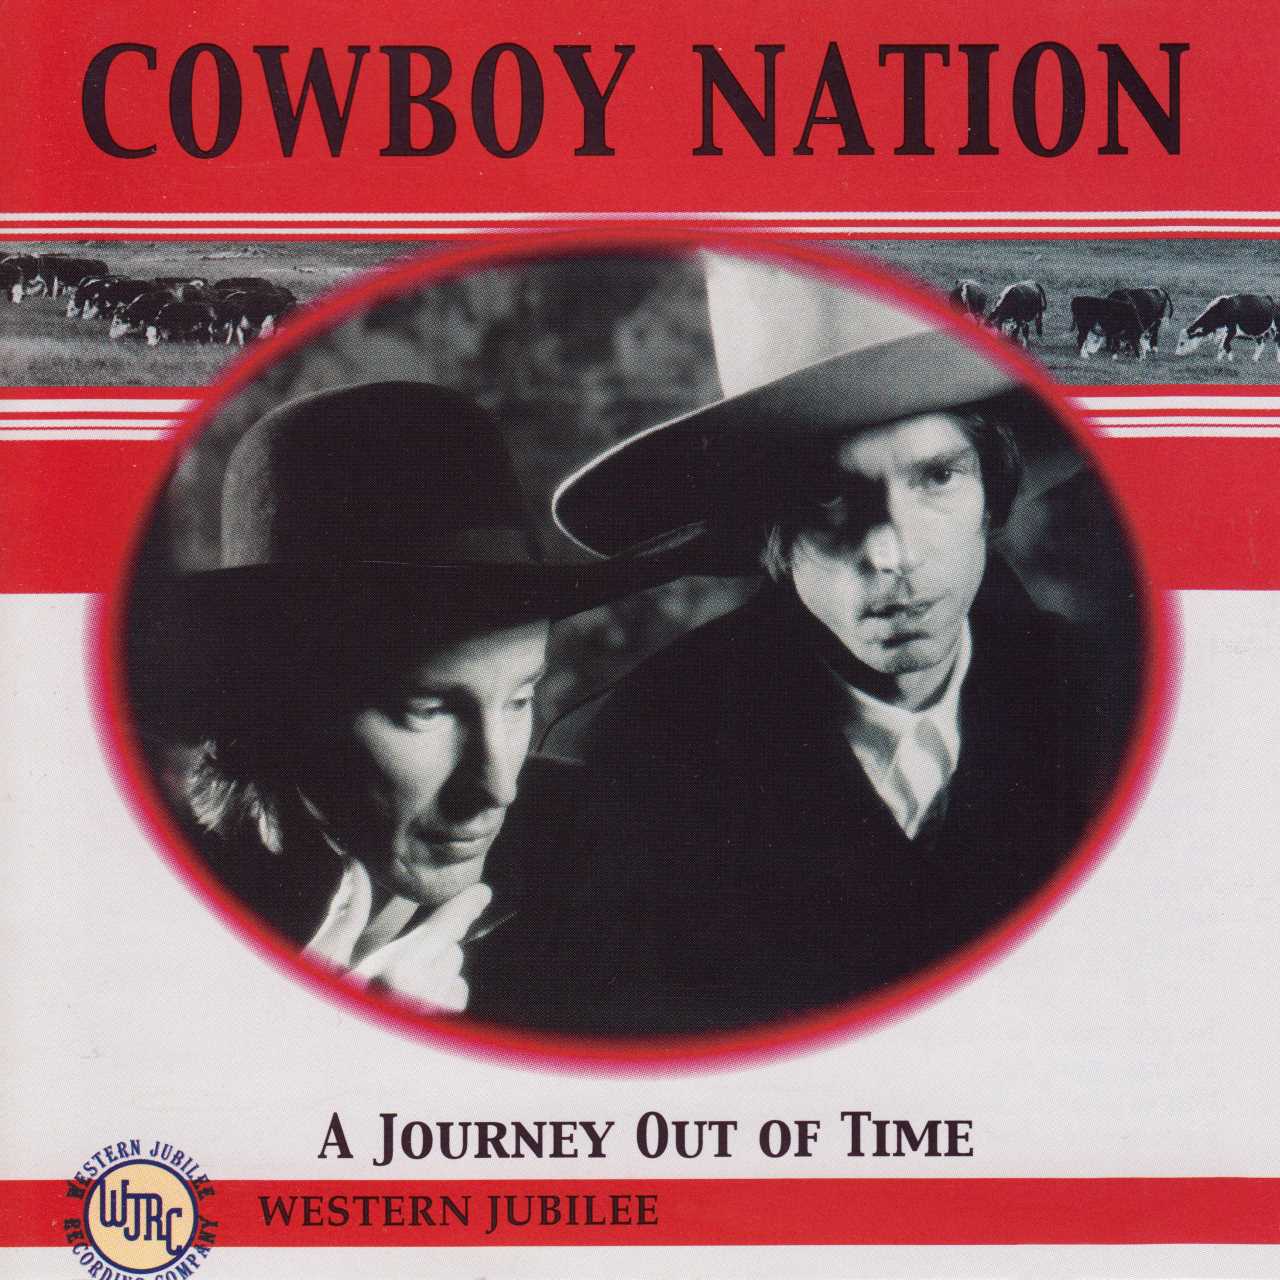 Cowboy Nation - A Journey Out Of Time cover album